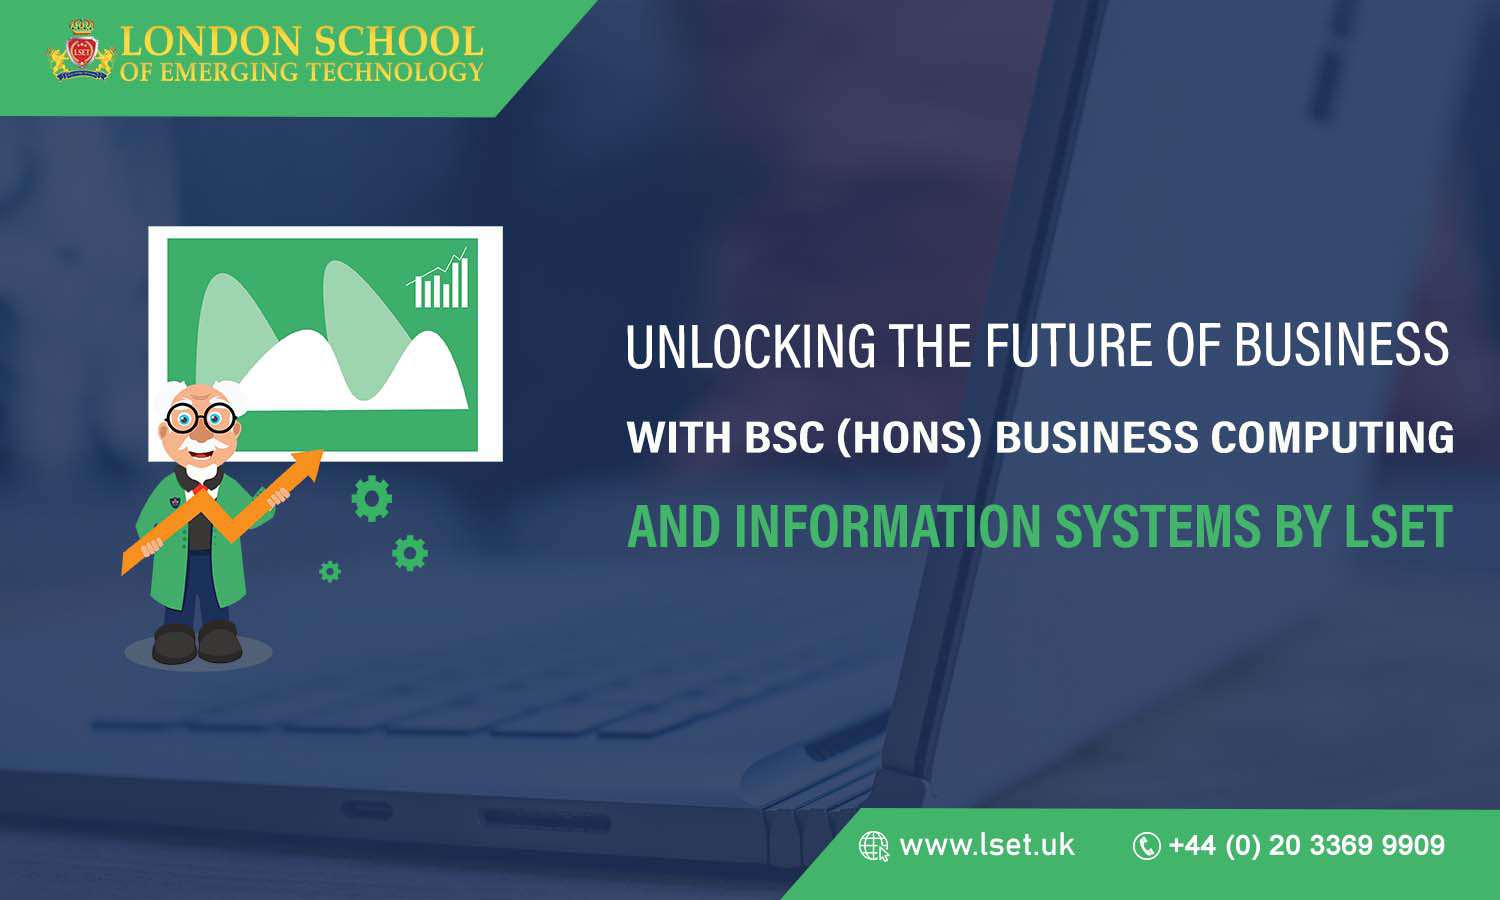 Unlocking the Future of Business with BSc (Hons) Business Computing and Information Systems by LSET